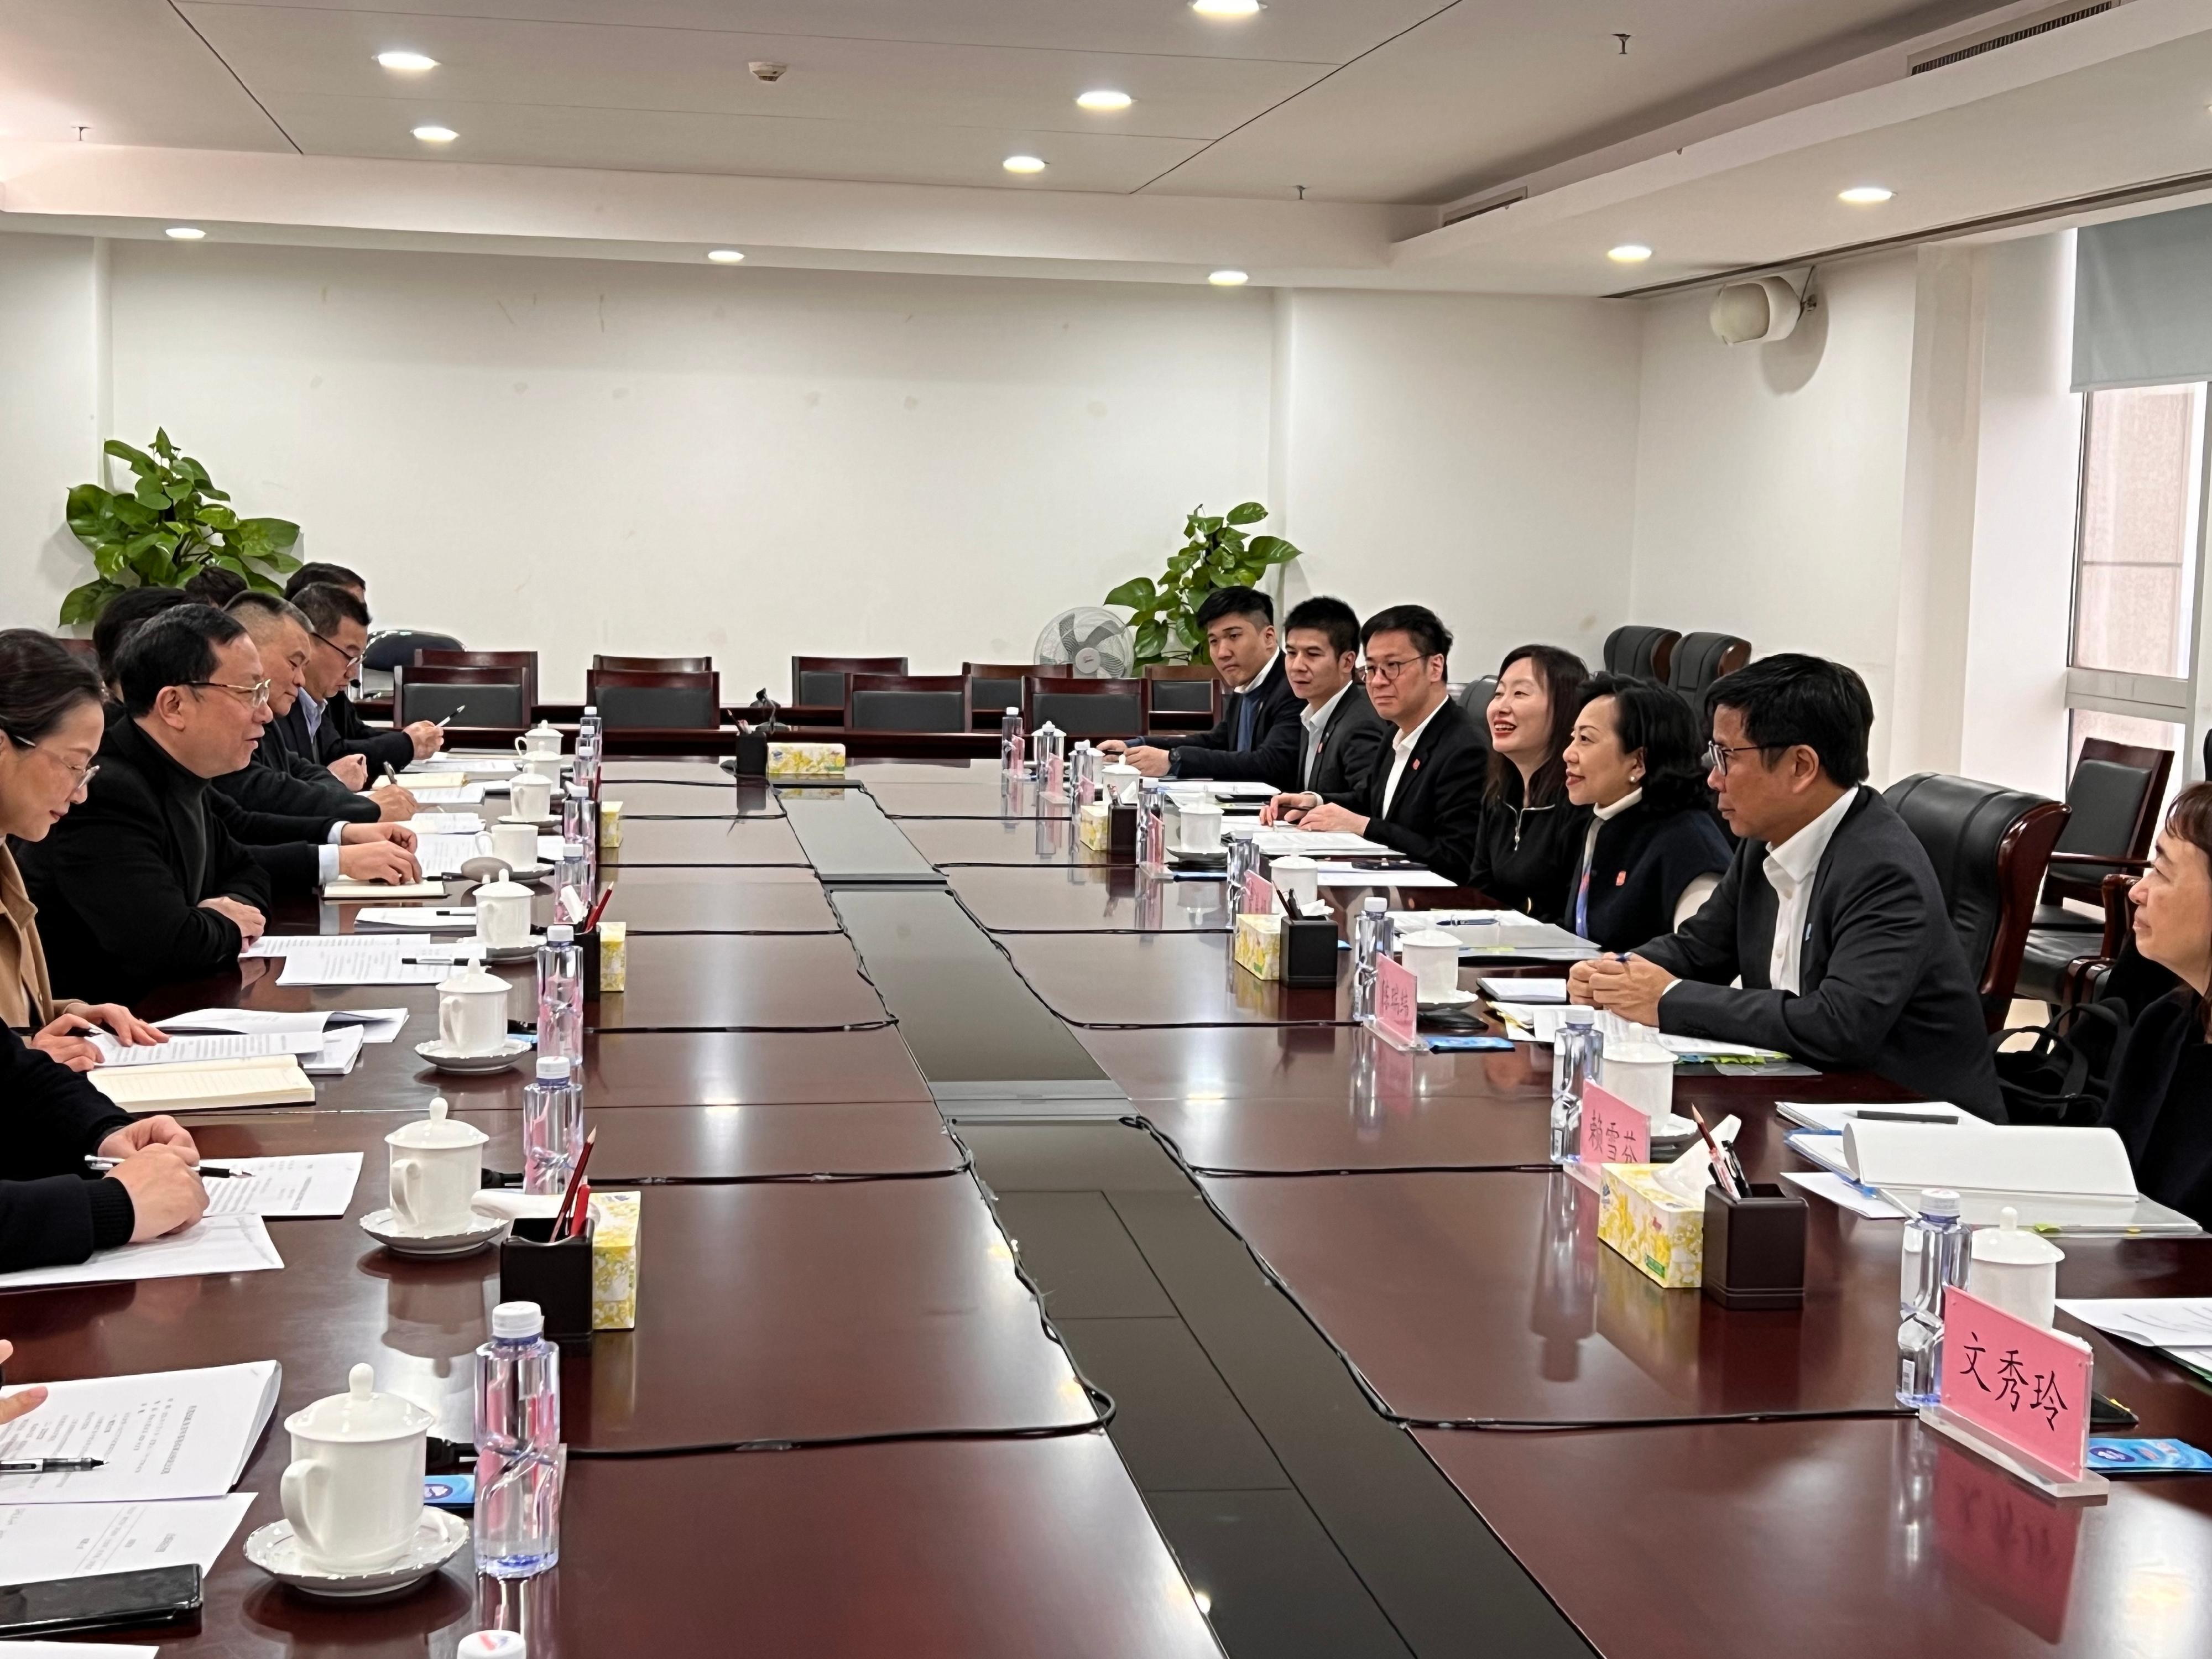 The Secretary for Home and Youth Affairs, Miss Alice Mak, today (March 1) paid a visit to the Human Resources and Social Security Department of Guangdong Province. Photo shows Miss Mak (third right), accompanied by the Commissioner for Youth, Mr Eric Chan (second right), meeting with the Director-General of the Human Resources and Social Security Department of Guangdong Province, Mr Du Minqi (second left).